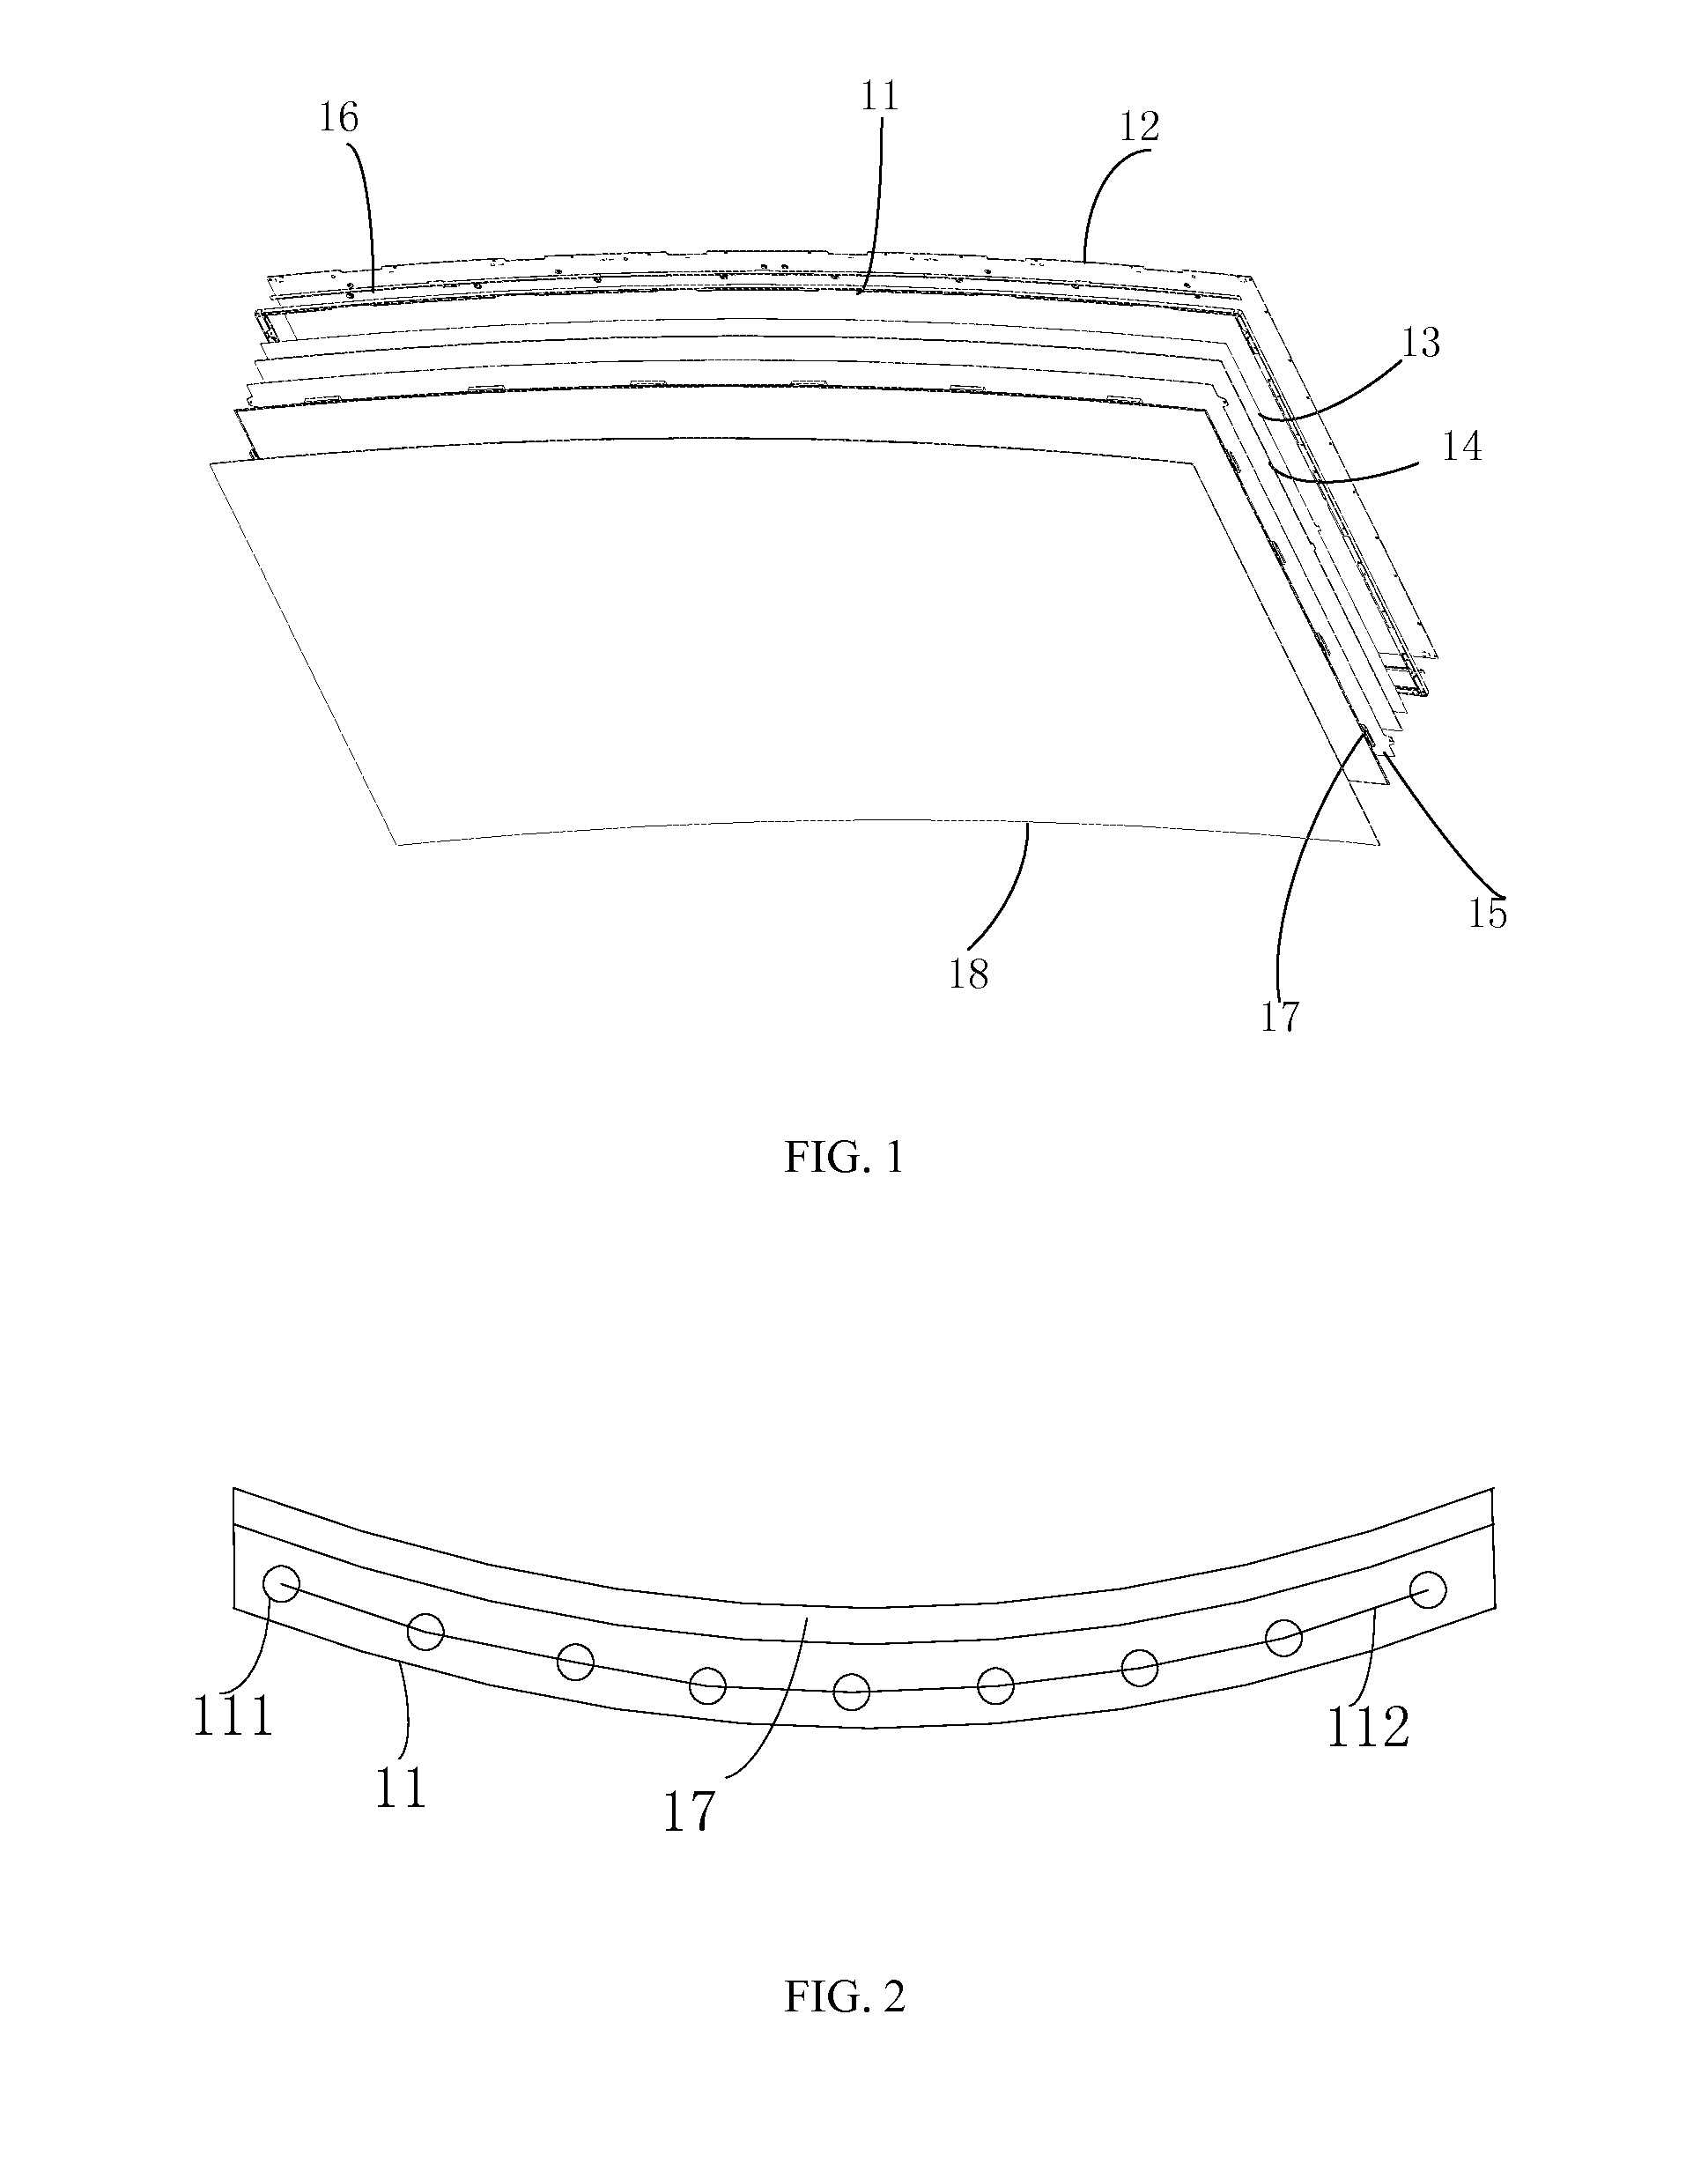 A curved display device